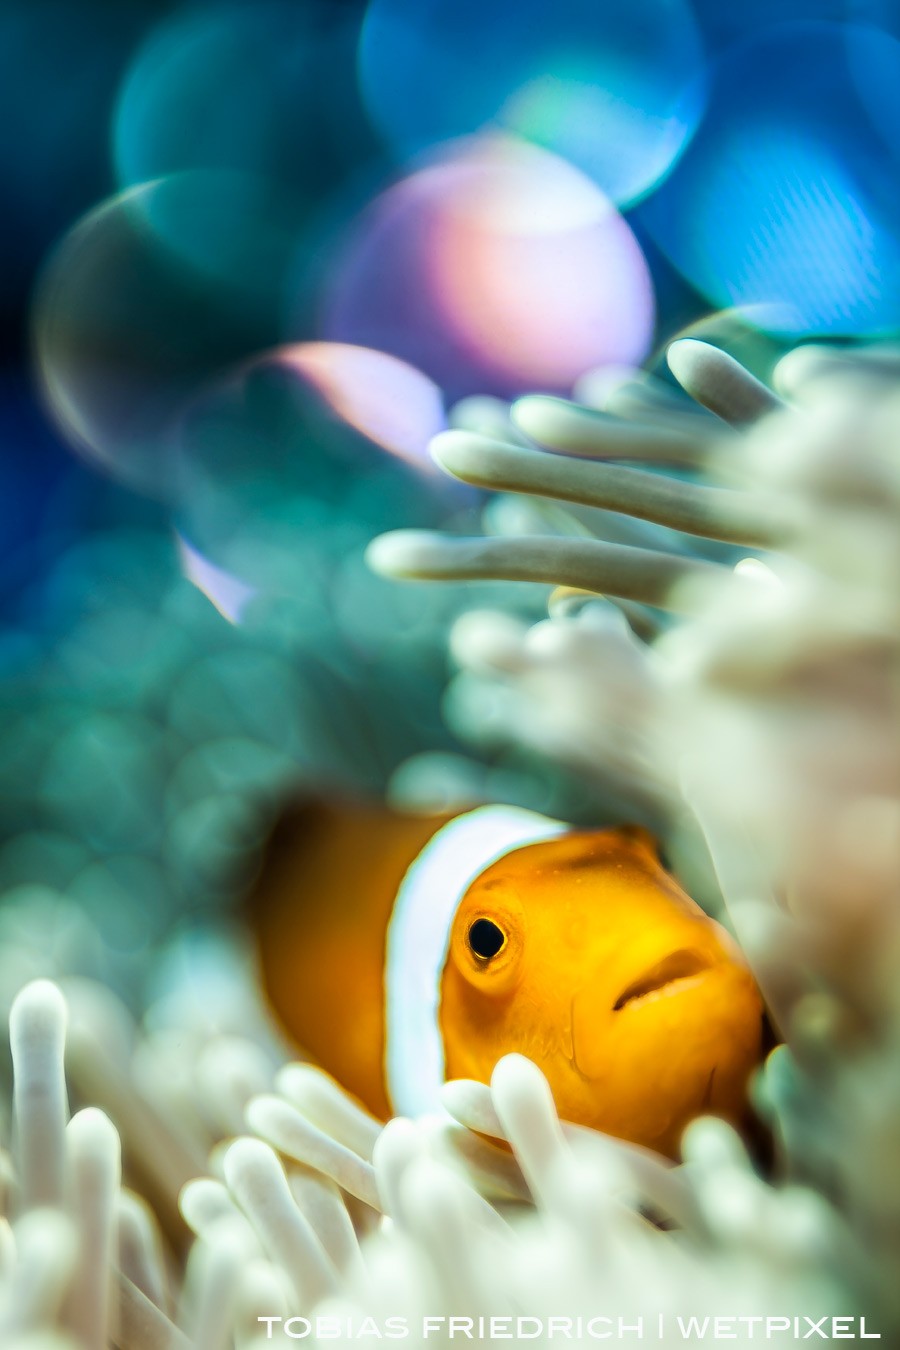 A clownfish (*Amphiprion ocellaris*) nestled in its host anemone with a bokeh background